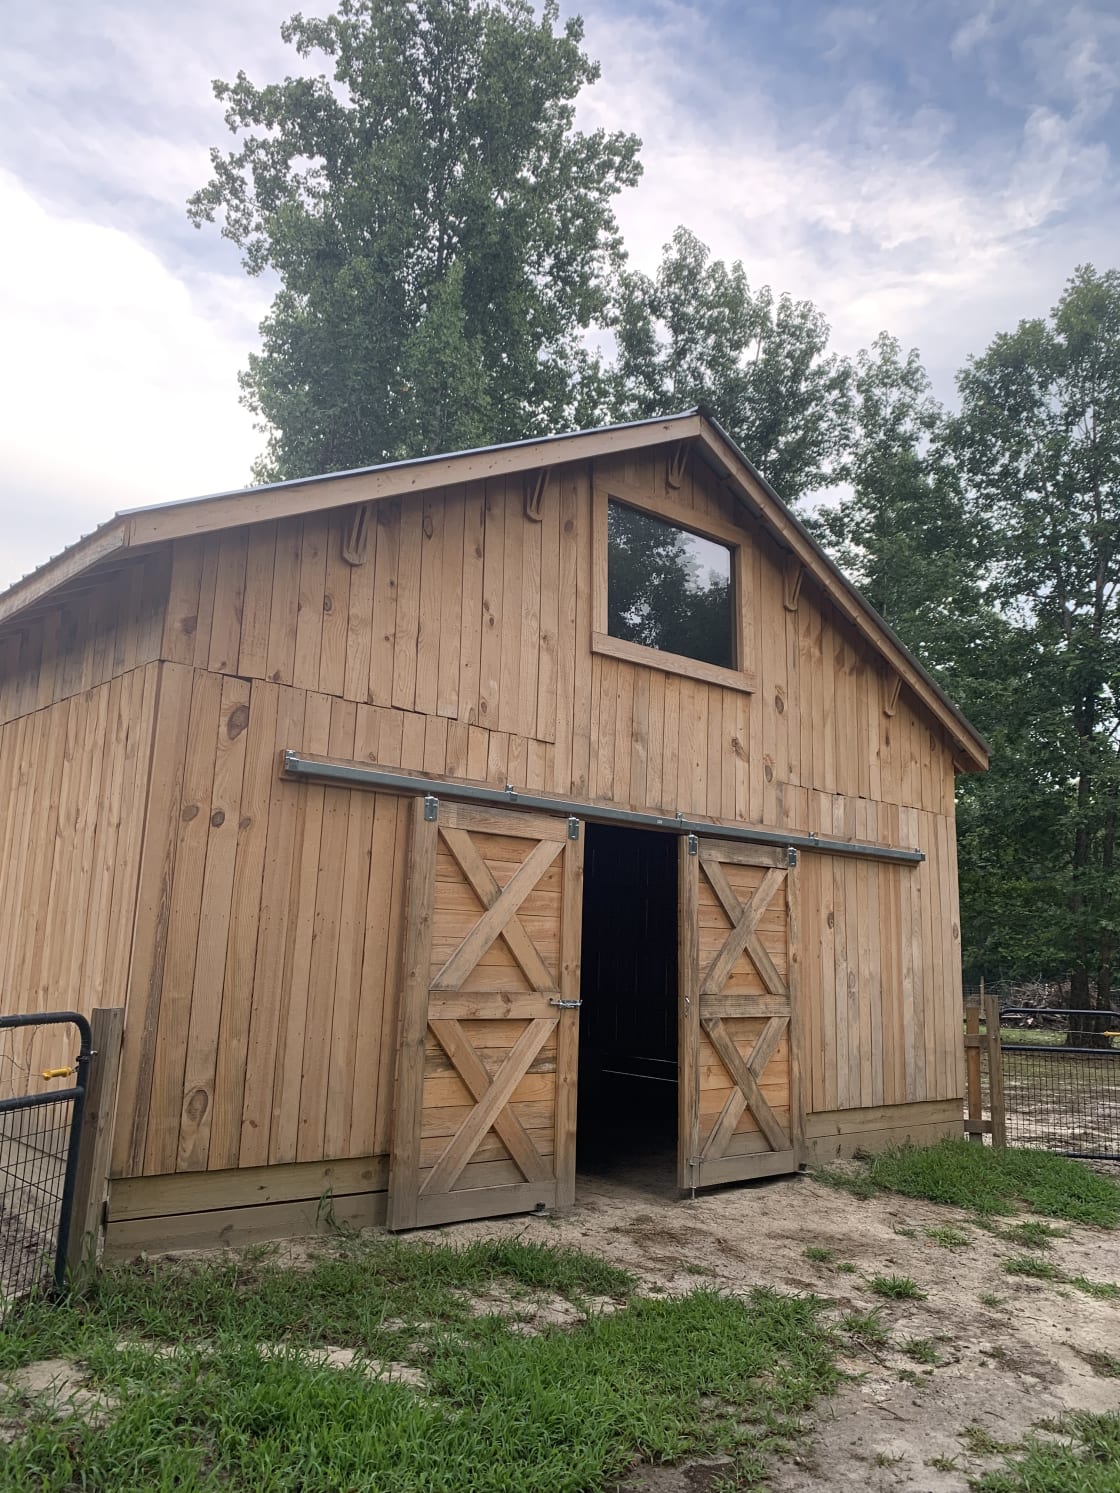 Our barn houses our sheep, goats and Great Pyrenees. All campsites are accessible by parking at the barn and taking a short walk into the woods.